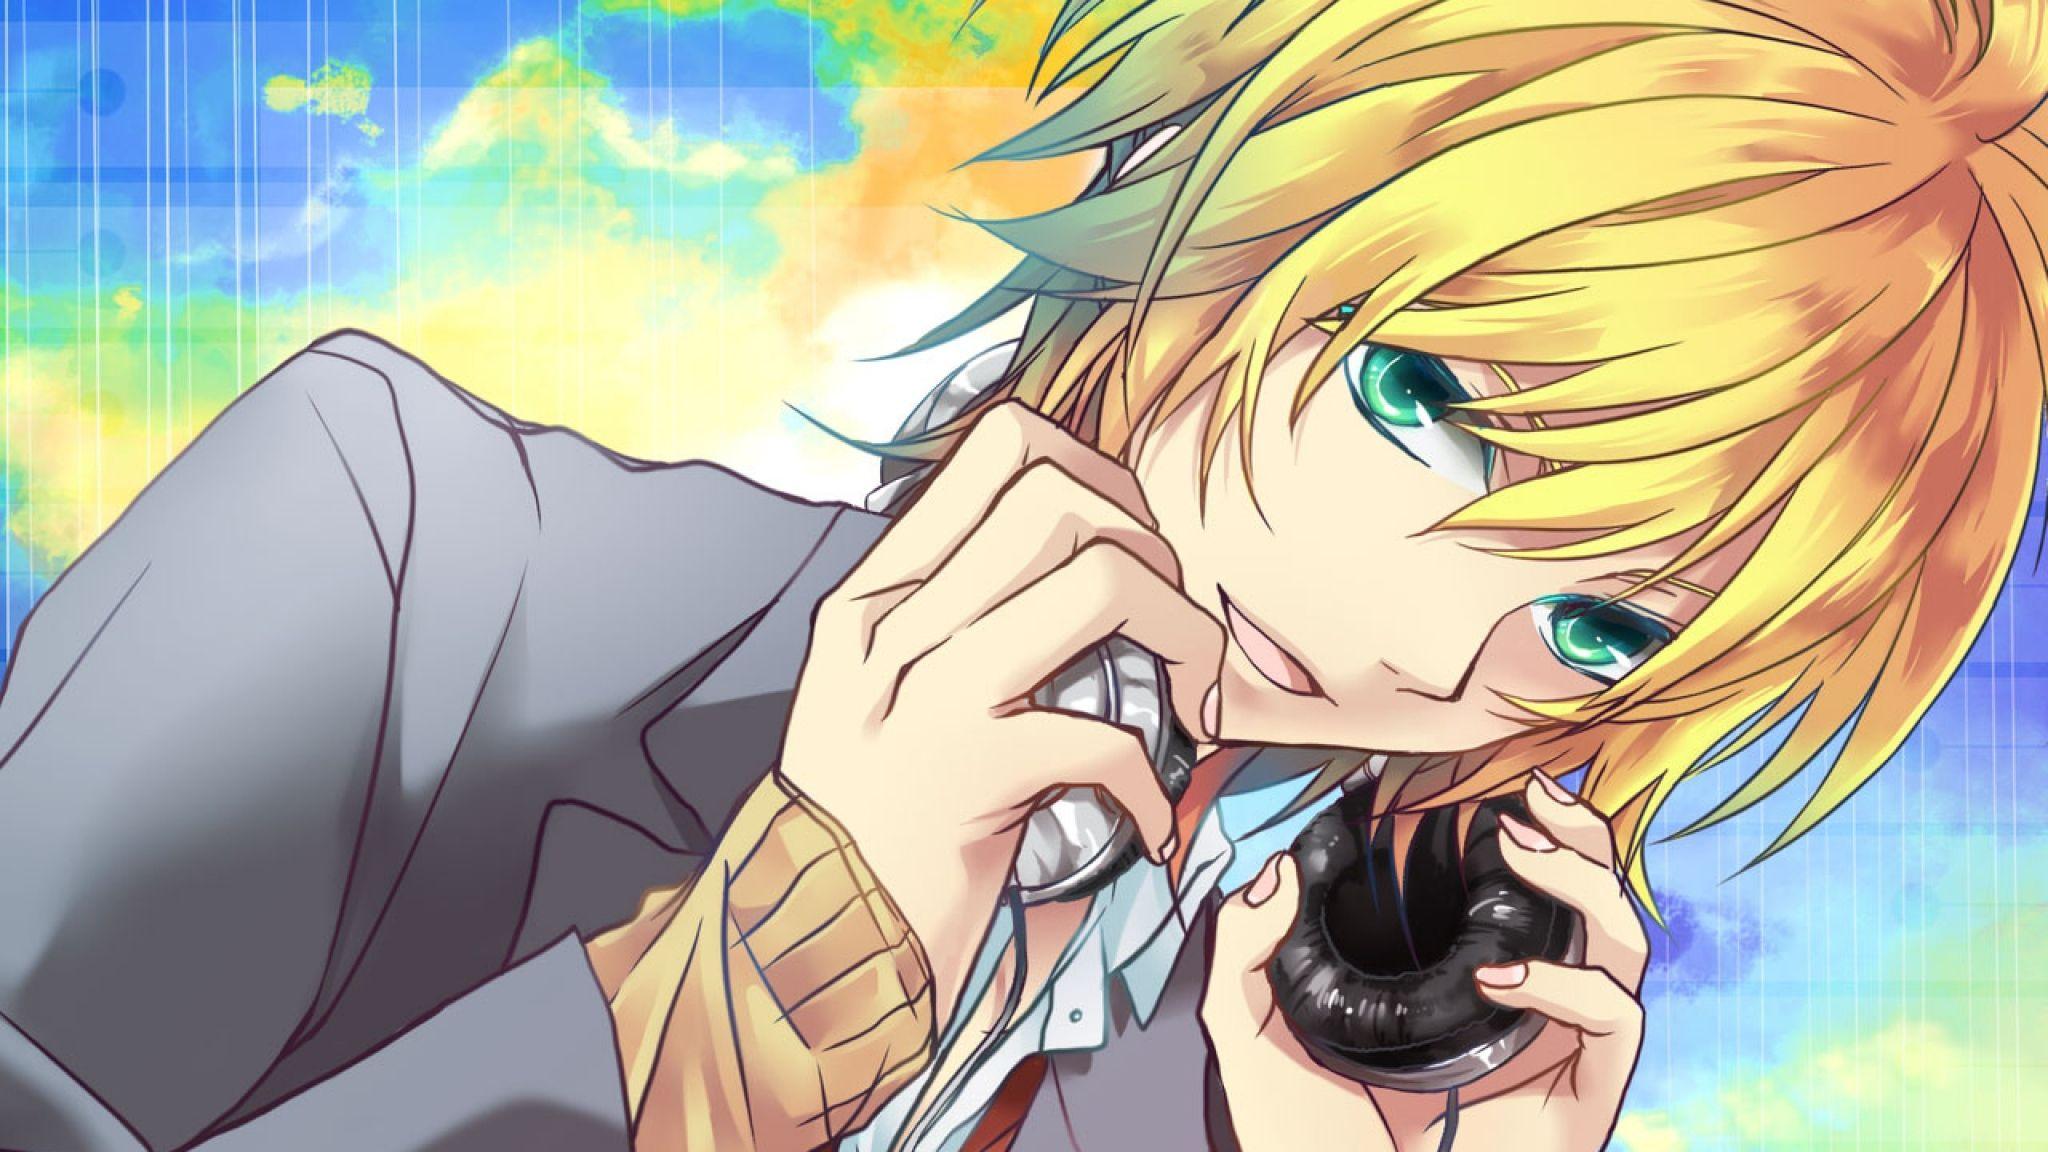 A blonde haired anime character wearing a suit and tie, holding a camera up to his eye. - 